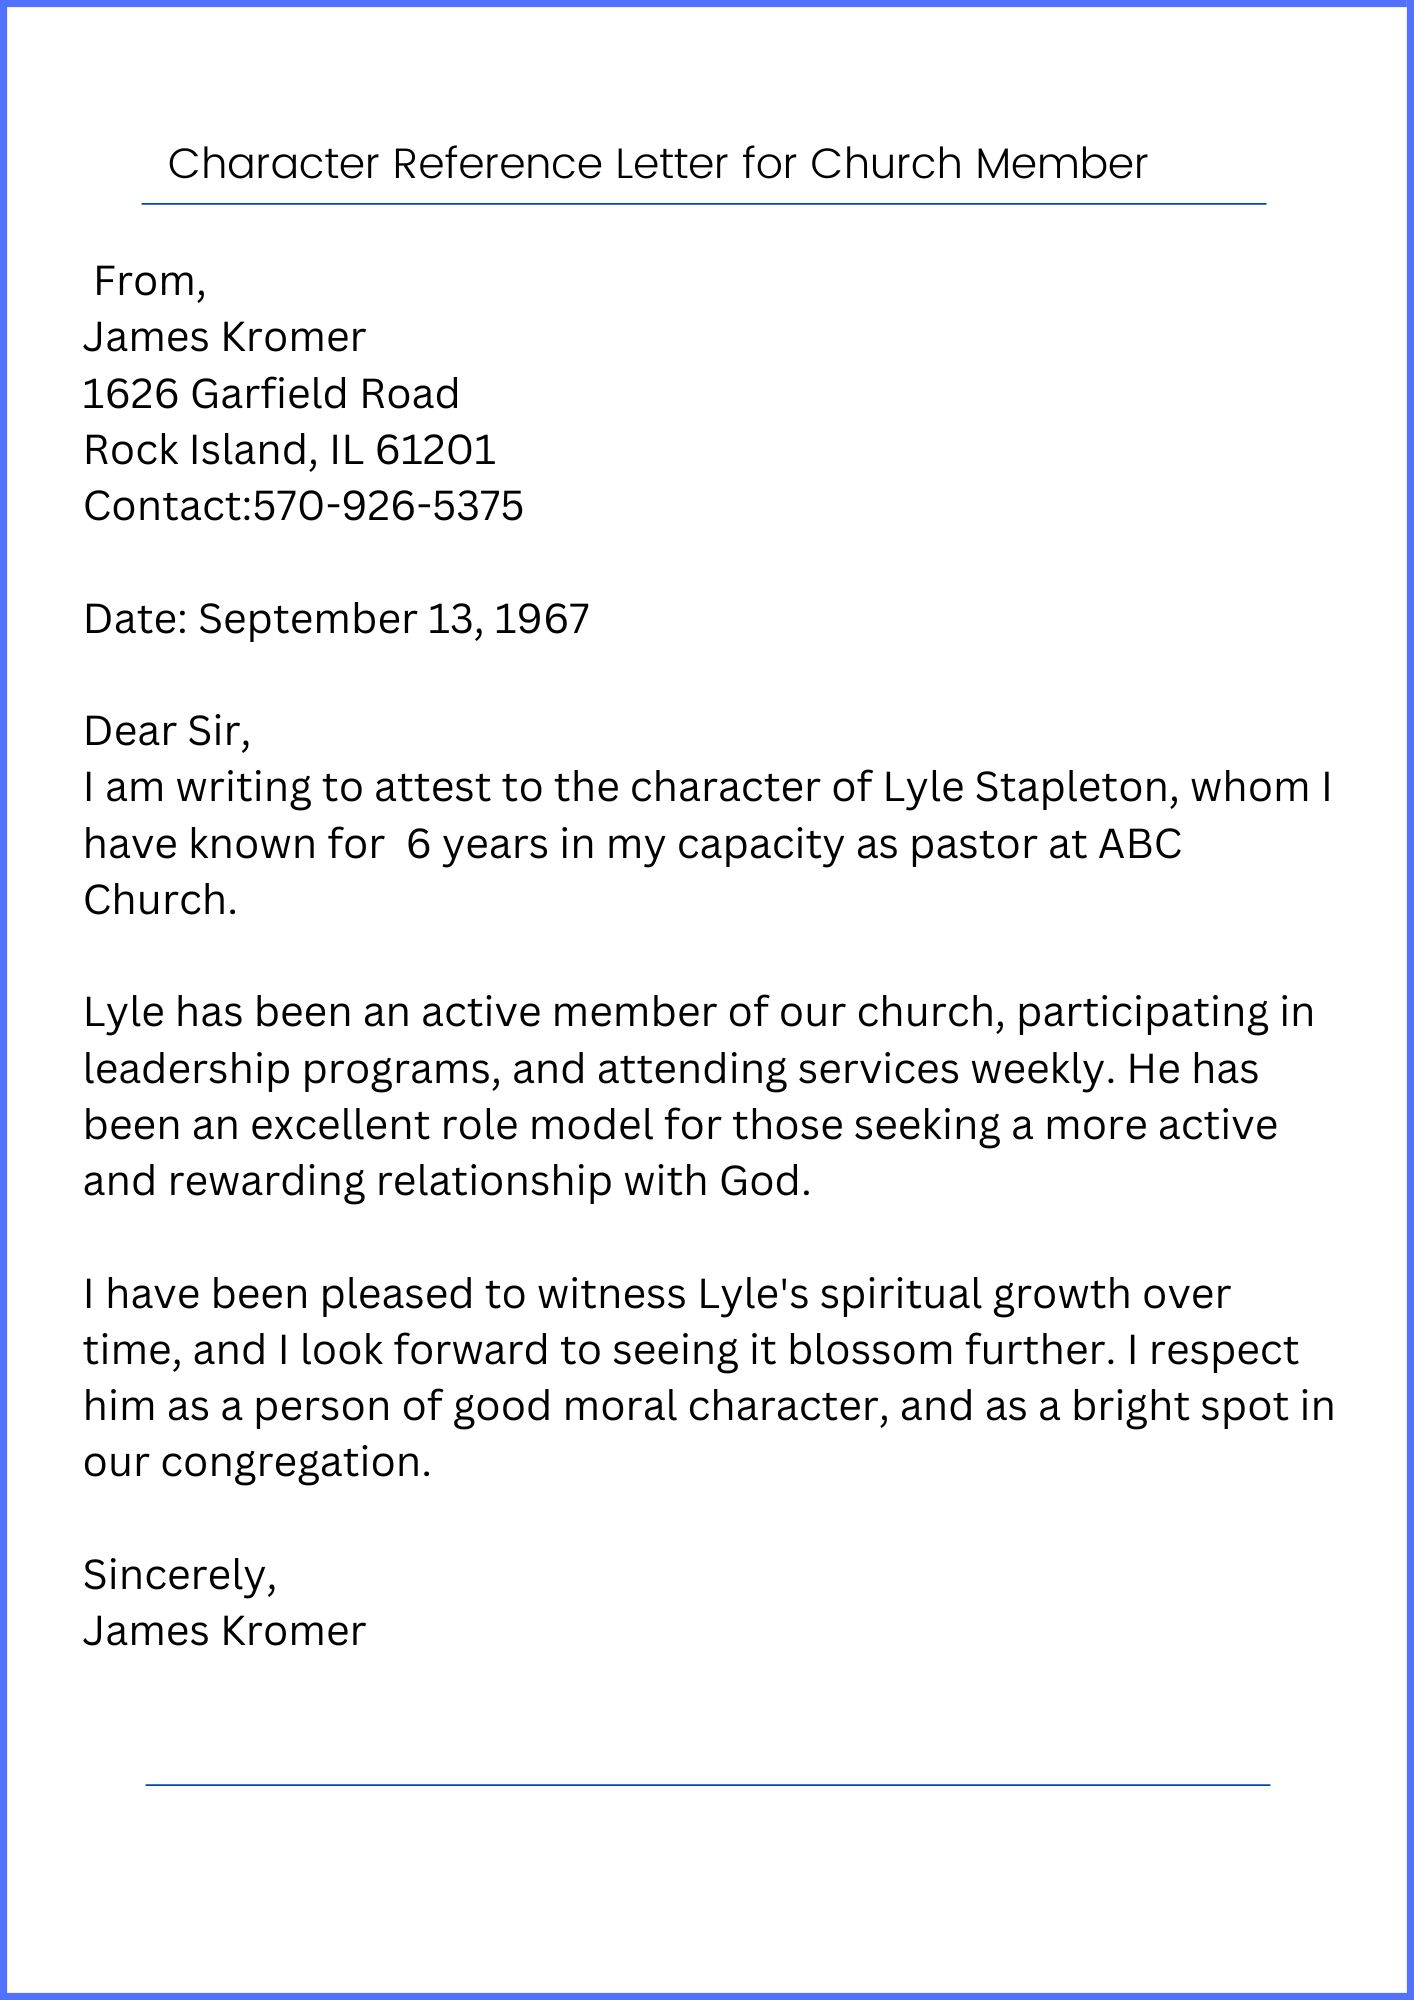  Character Reference Letter for Church Member